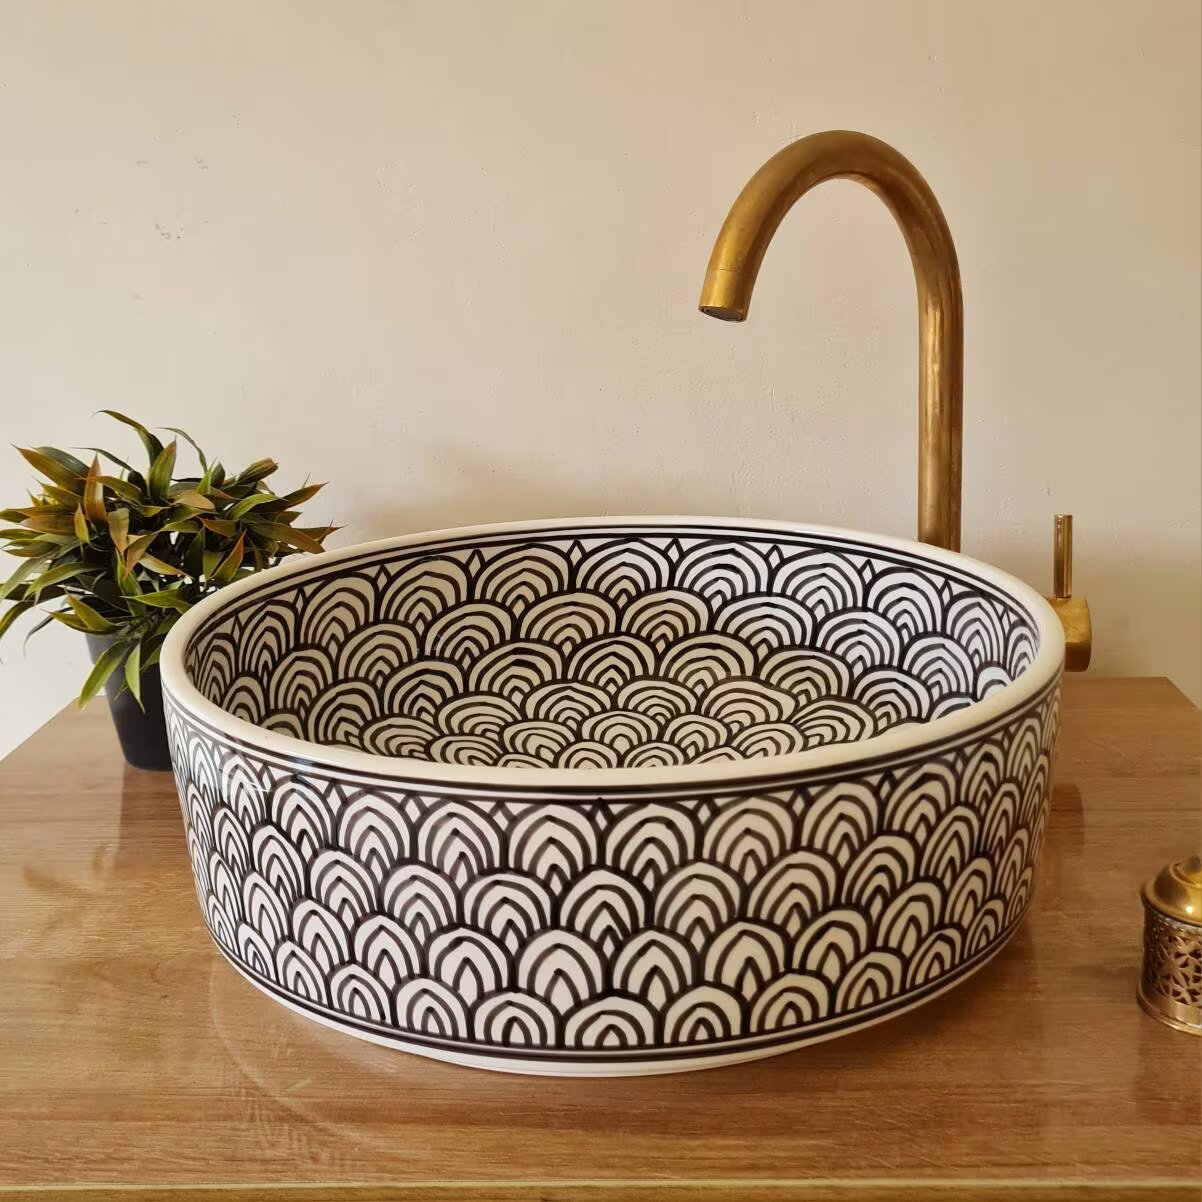 Moroccan sink | moroccan ceramic sink | bathroom sink | moroccan bathroom basin | cloakroom basin | Bllack and white #16